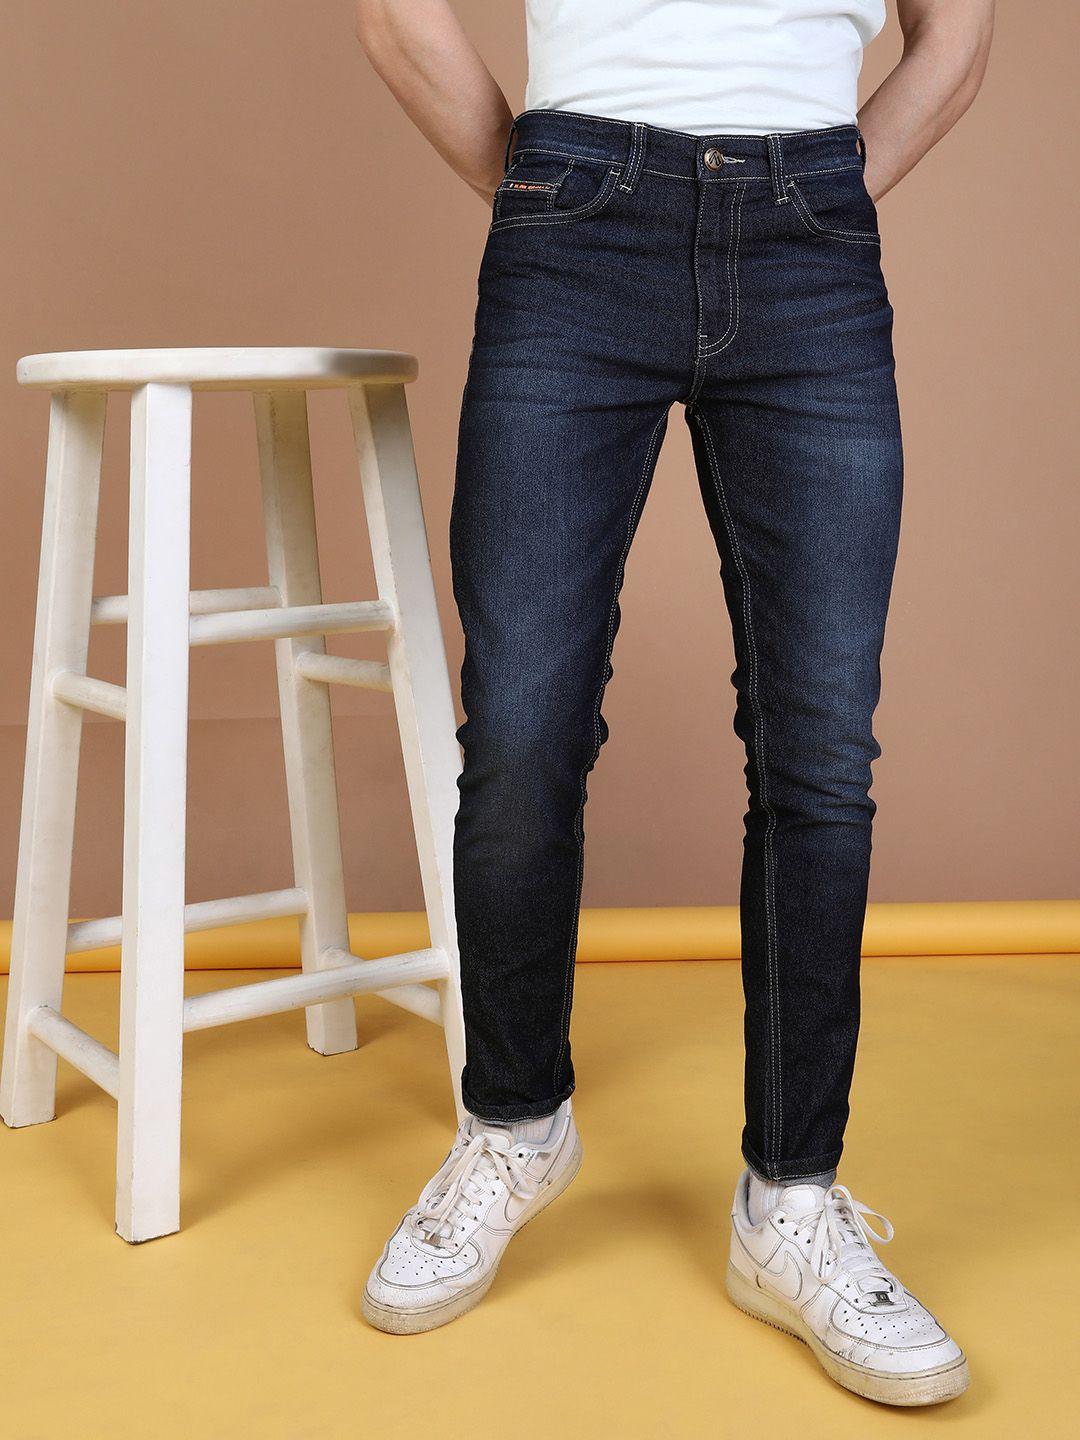 the-indian-garage-co-men-navy-blue-slim-fit-mid-rise-clean-look-jeans